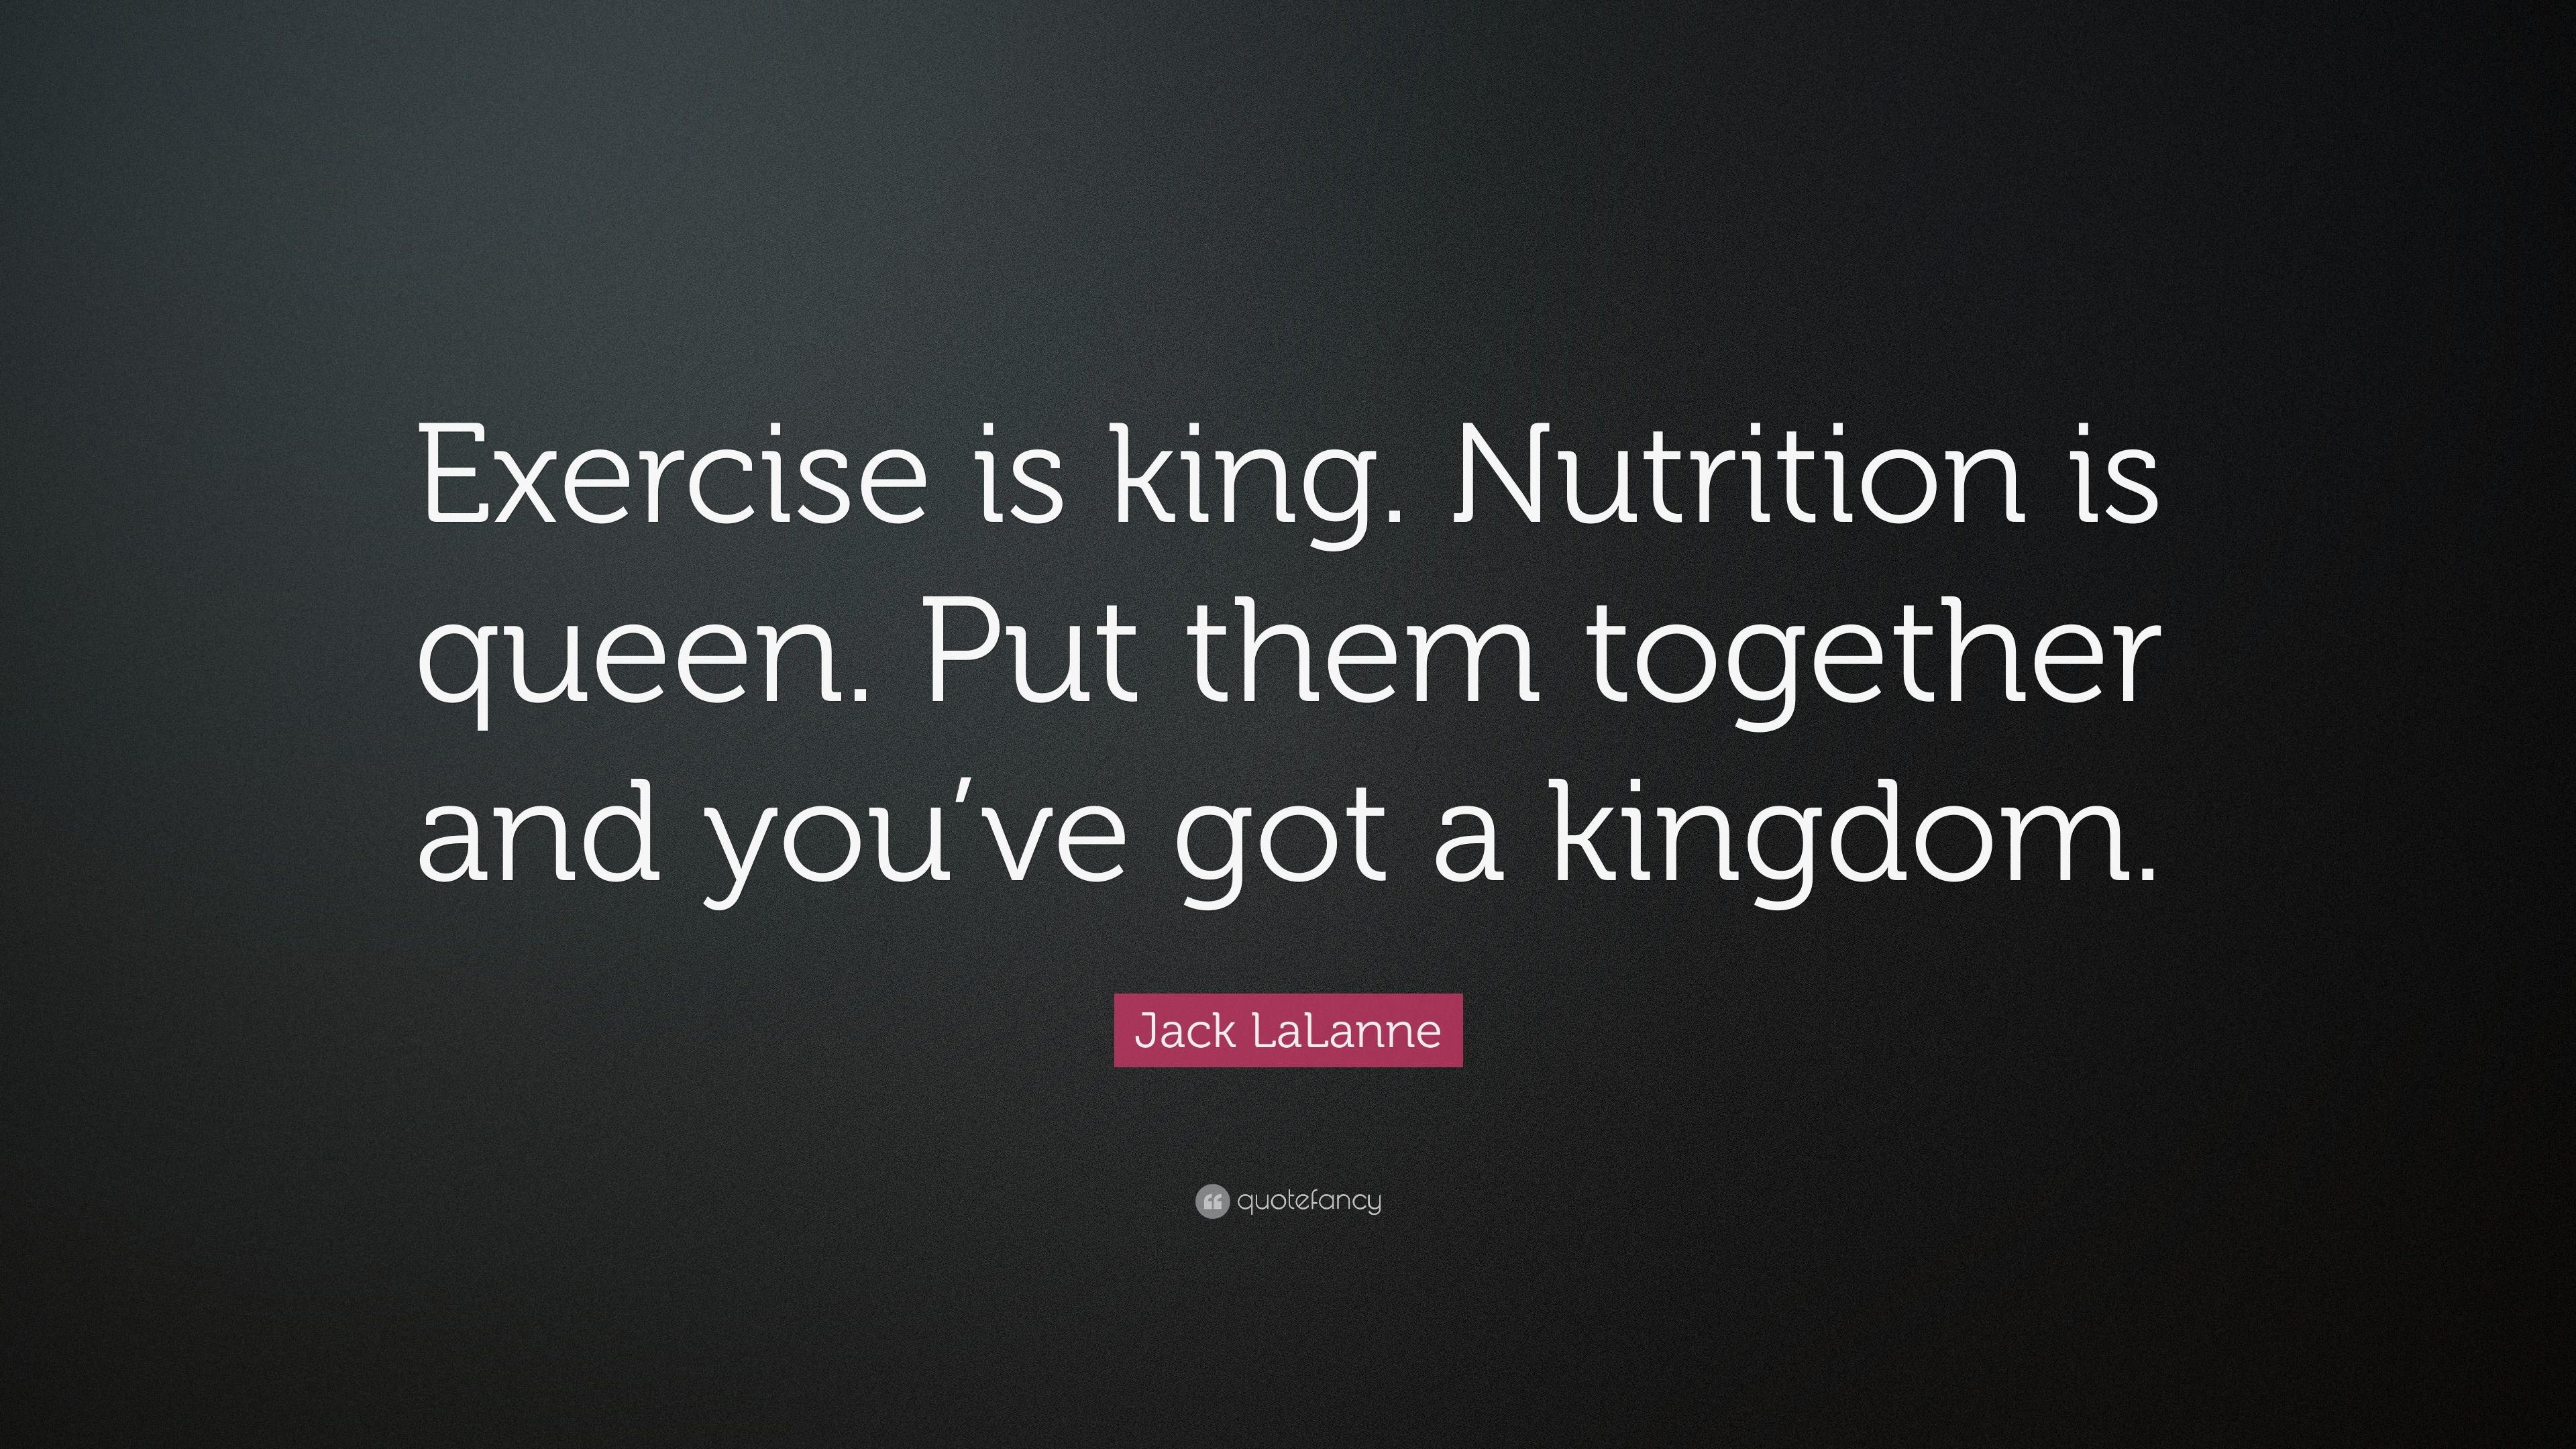 Jack LaLanne Quote: “Exercise is king. Nutrition is queen. Put